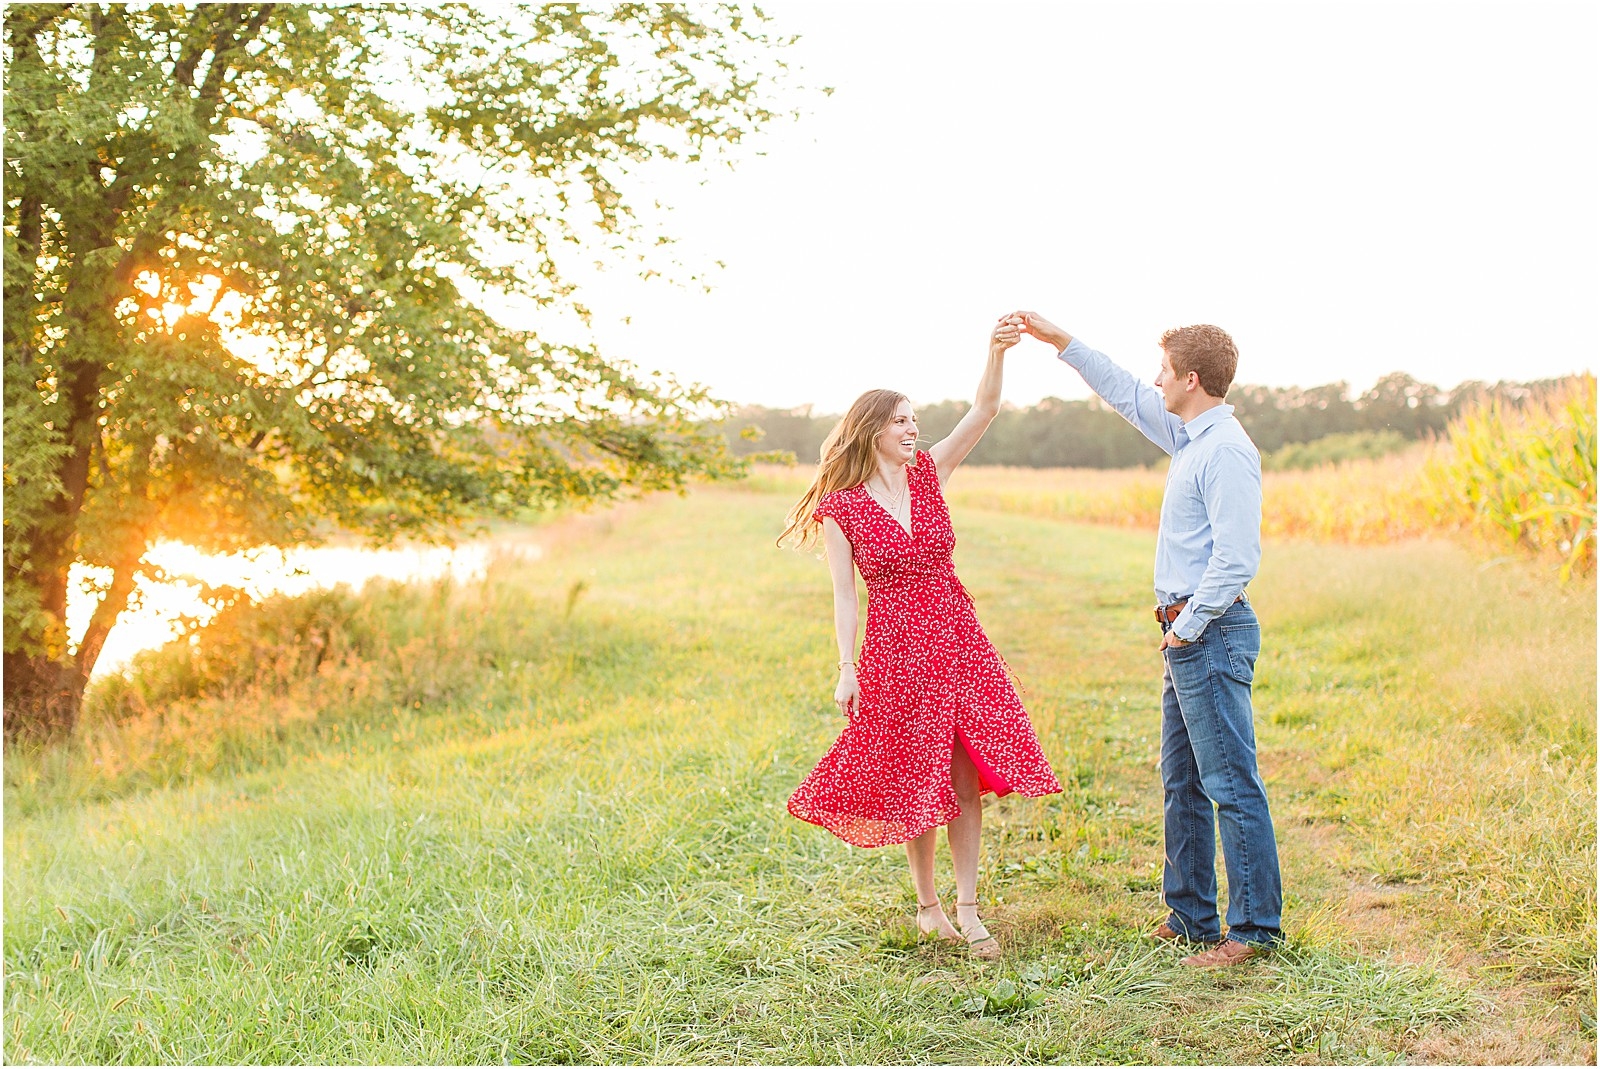 A Jasper Indiana Engagement Session | Tori and Kyle | Bret and Brandie Photography048.jpg